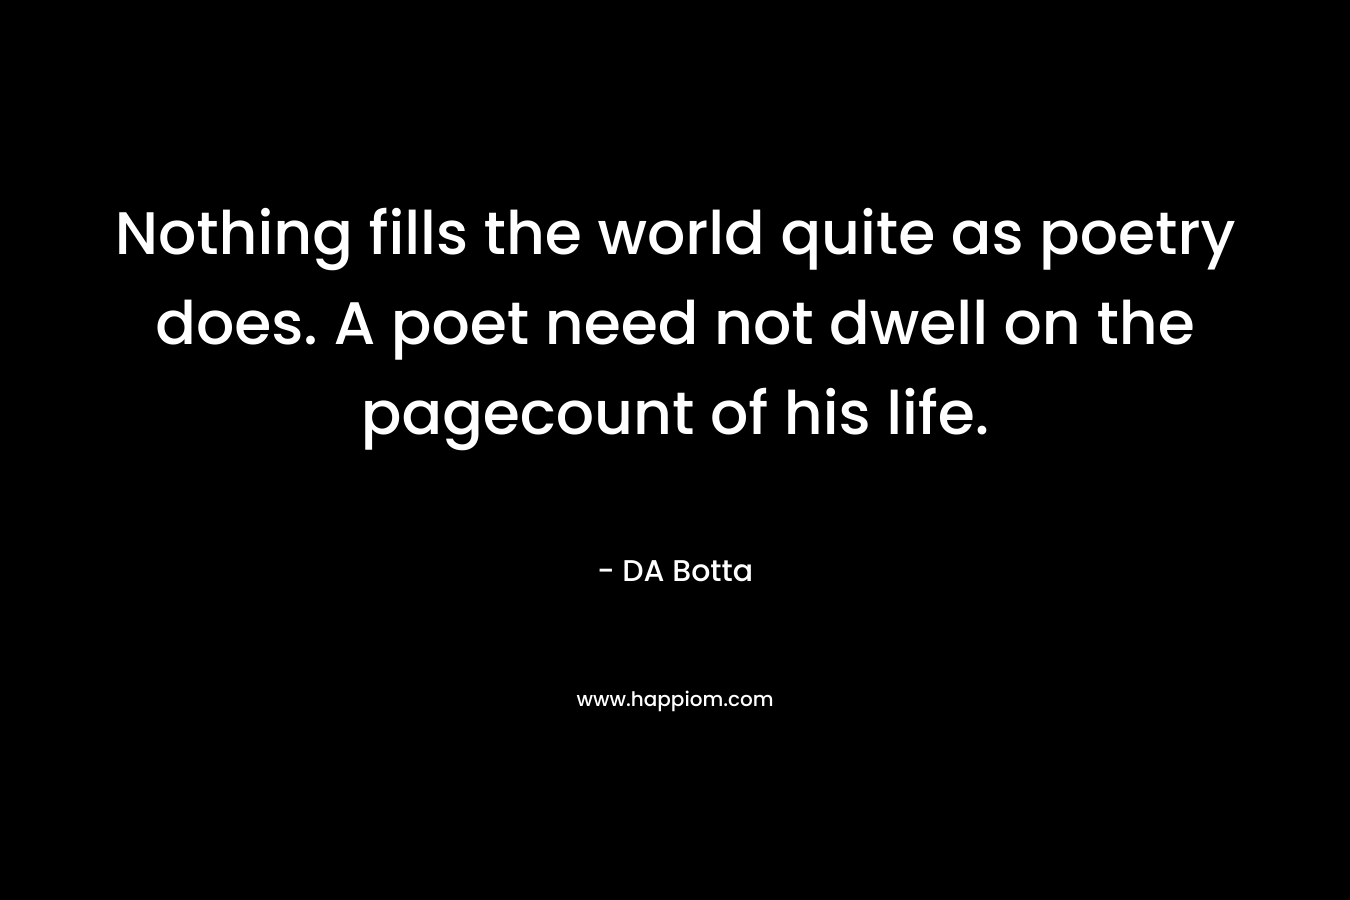 Nothing fills the world quite as poetry does. A poet need not dwell on the pagecount of his life.